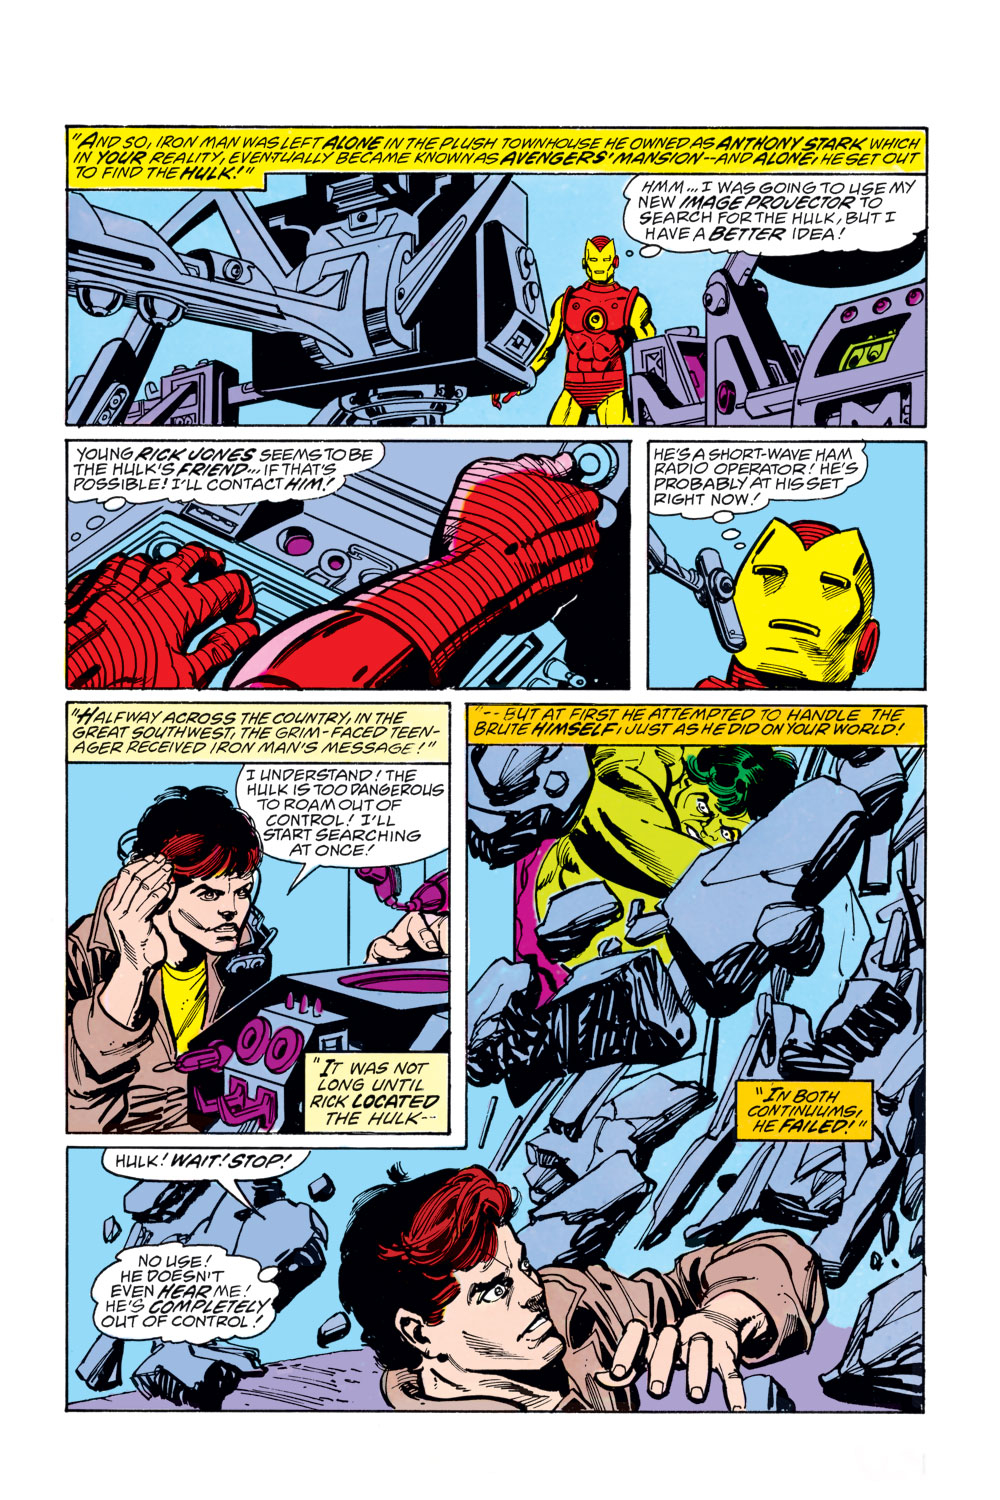 What If? (1977) issue 3 - The Avengers had never been - Page 7